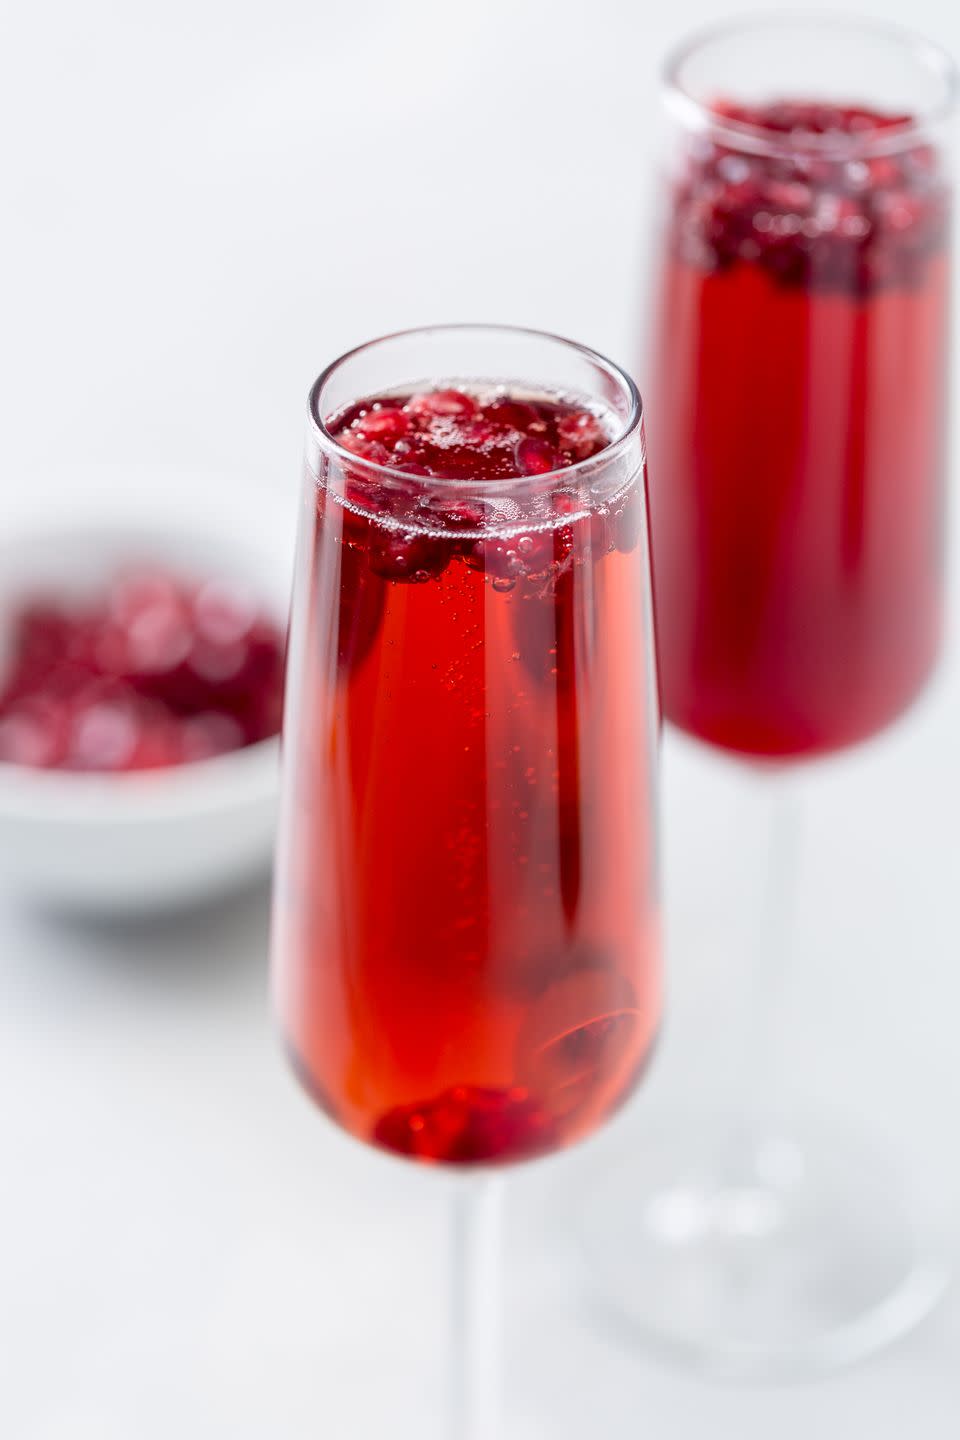 <p>Sweet and slightly tart, these ruby-red mimosas are our favorite festive cocktail pick for any date night or Galentine's Day party. Looking for the top-rated bubbly to use? We've narrowed down the <a href="https://www.delish.com/entertaining/wine/g32081460/best-sparkling-wine/" rel="nofollow noopener" target="_blank" data-ylk="slk:best sparkling wines" class="link ">best sparkling wines</a> for all your mimosa needs.</p><p>Get the <strong><a href="https://www.delish.com/cooking/recipe-ideas/recipes/a46968/pomegranate-mimosas-recipe/" rel="nofollow noopener" target="_blank" data-ylk="slk:Pomegranate Mimosas recipe" class="link ">Pomegranate Mimosas recipe</a></strong>.</p>